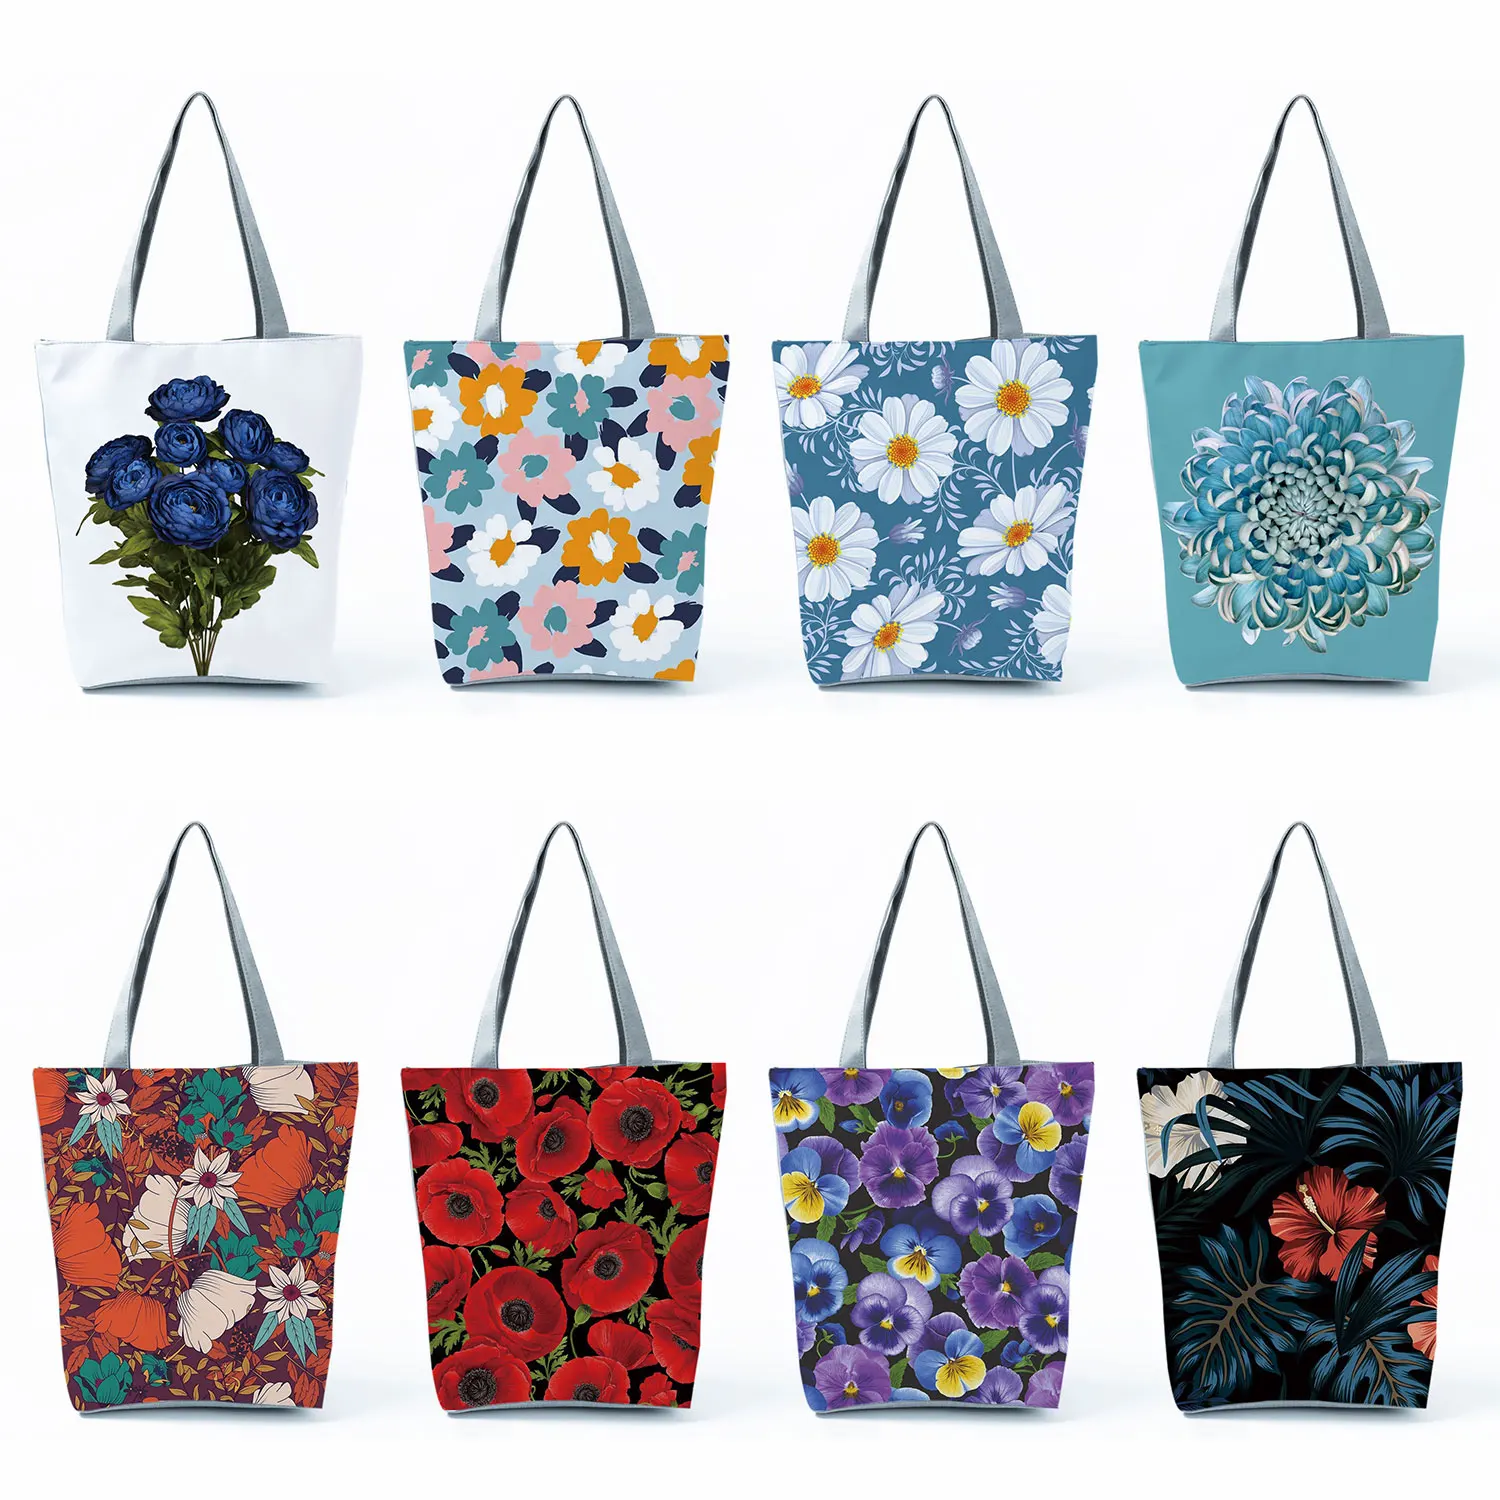 

Customized Logo Pattern Handbags Bright Colors Daisy Rose Totes Bags For Women Casual Outdoor Beach Large Capacity Shopping Bag